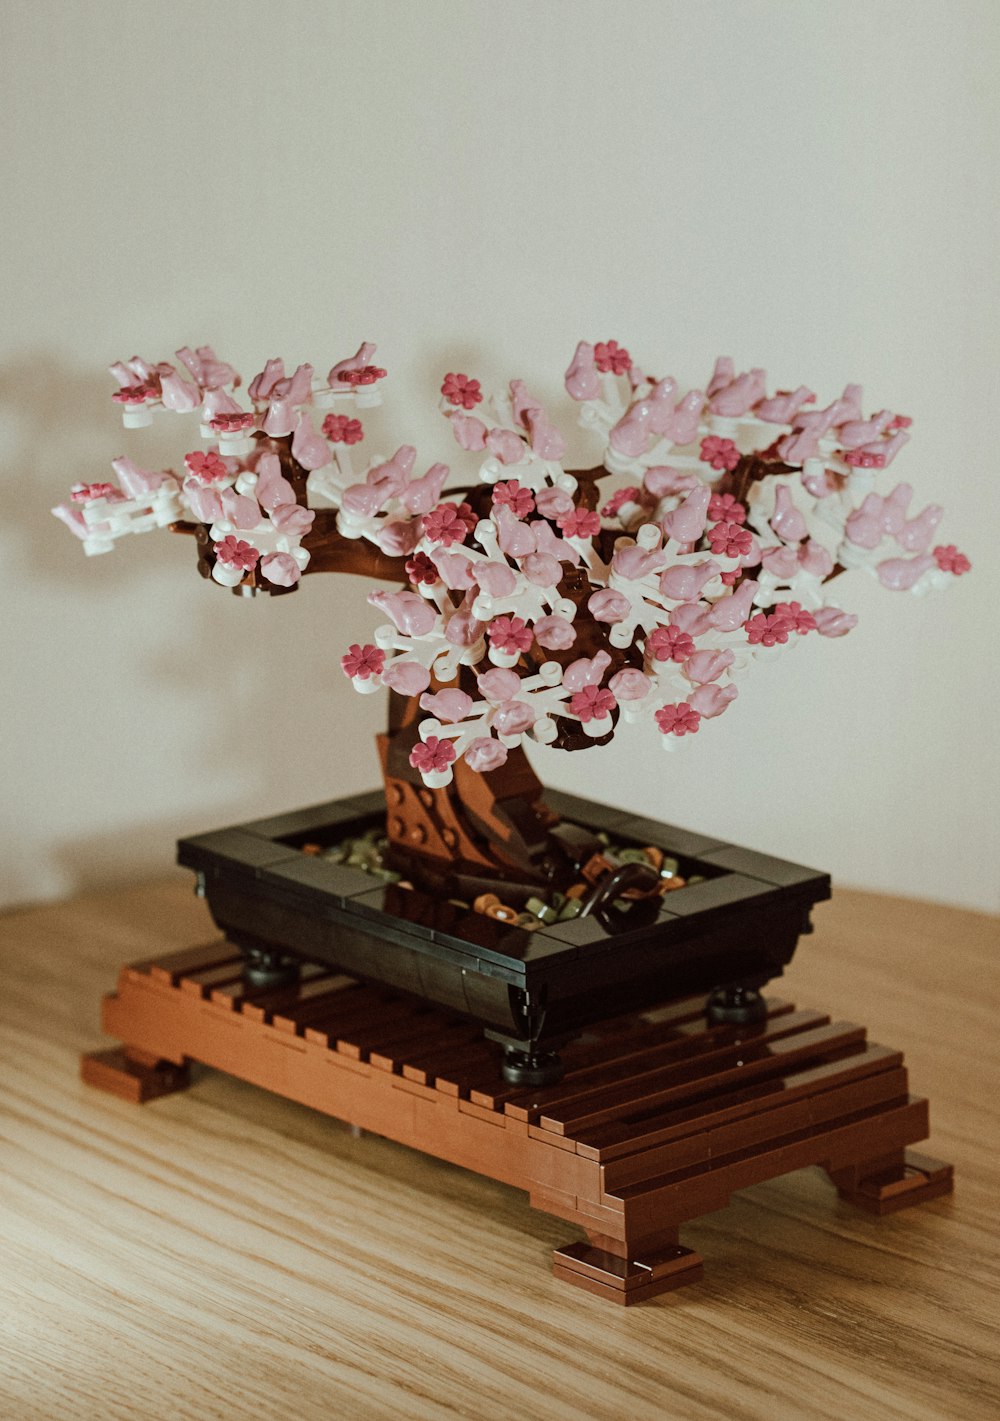 a bonsai tree with pink flowers on a wooden table